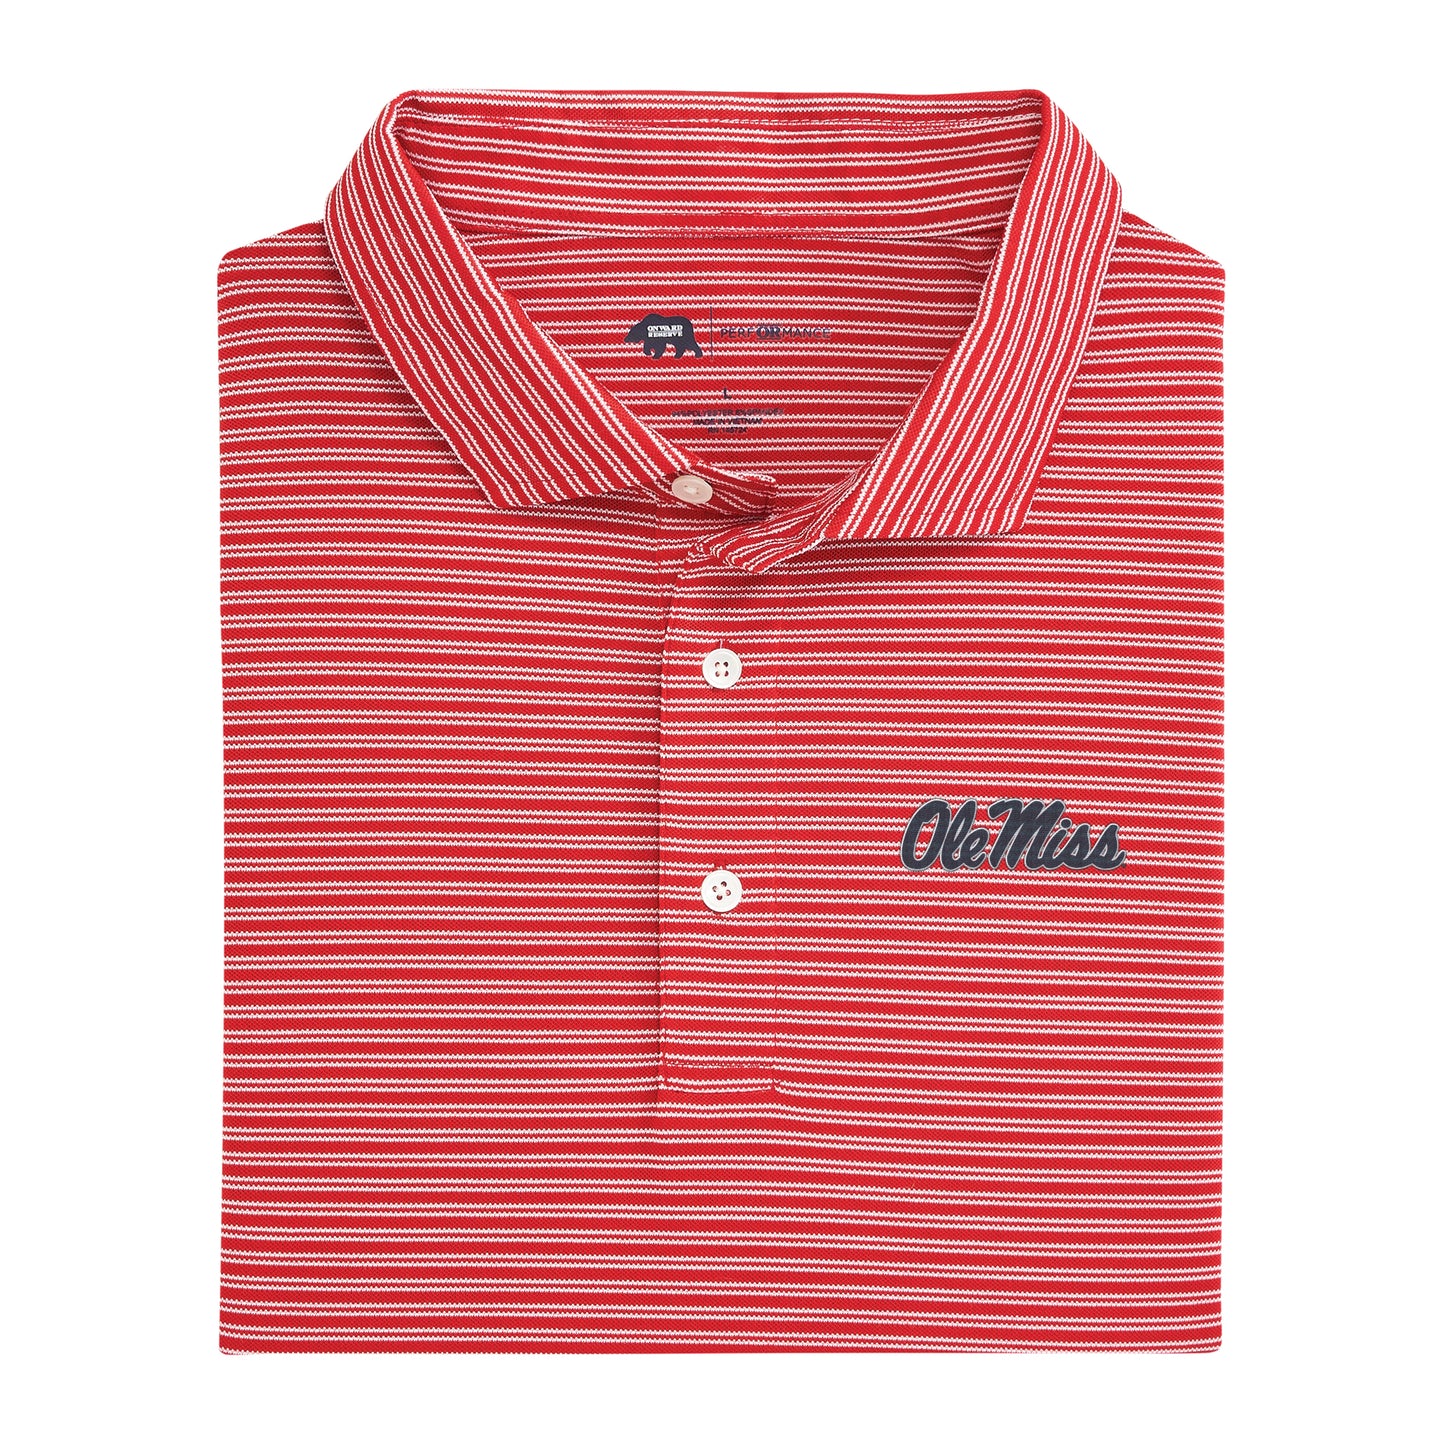 Pairing Stripe Ole Miss Performance Pique Polo